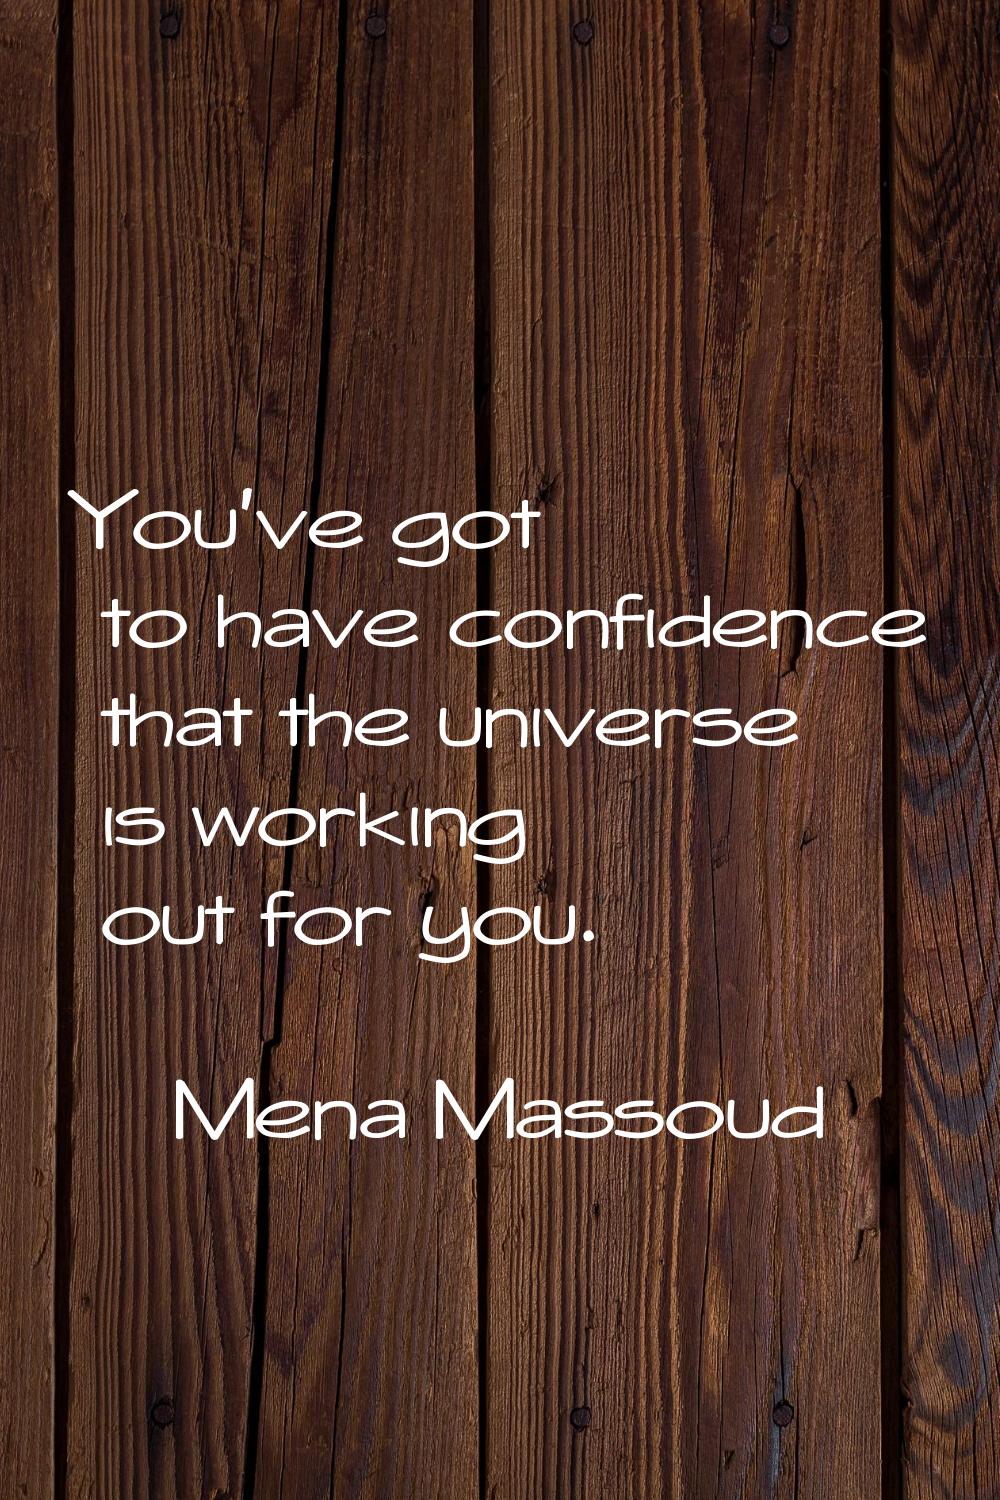 You've got to have confidence that the universe is working out for you.